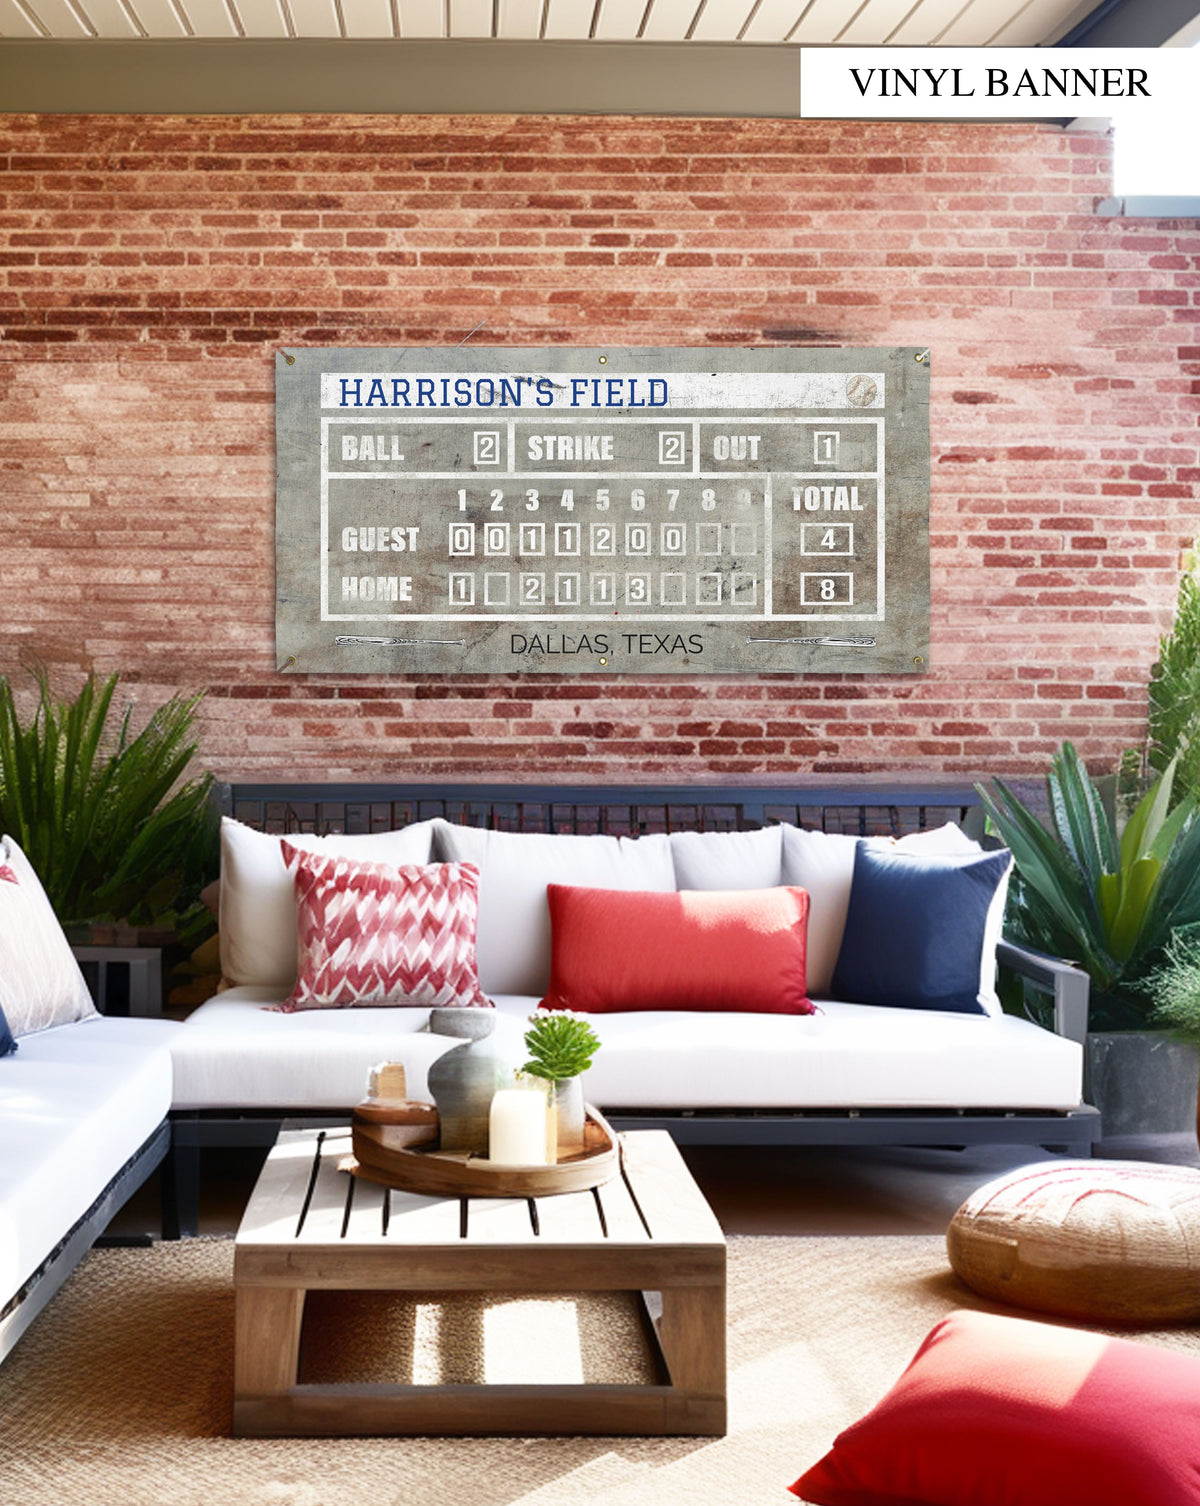 Custom Vintage Baseball Vinyl Banner: Capture the essence of the game with a distressed design for home or outdoor decor.